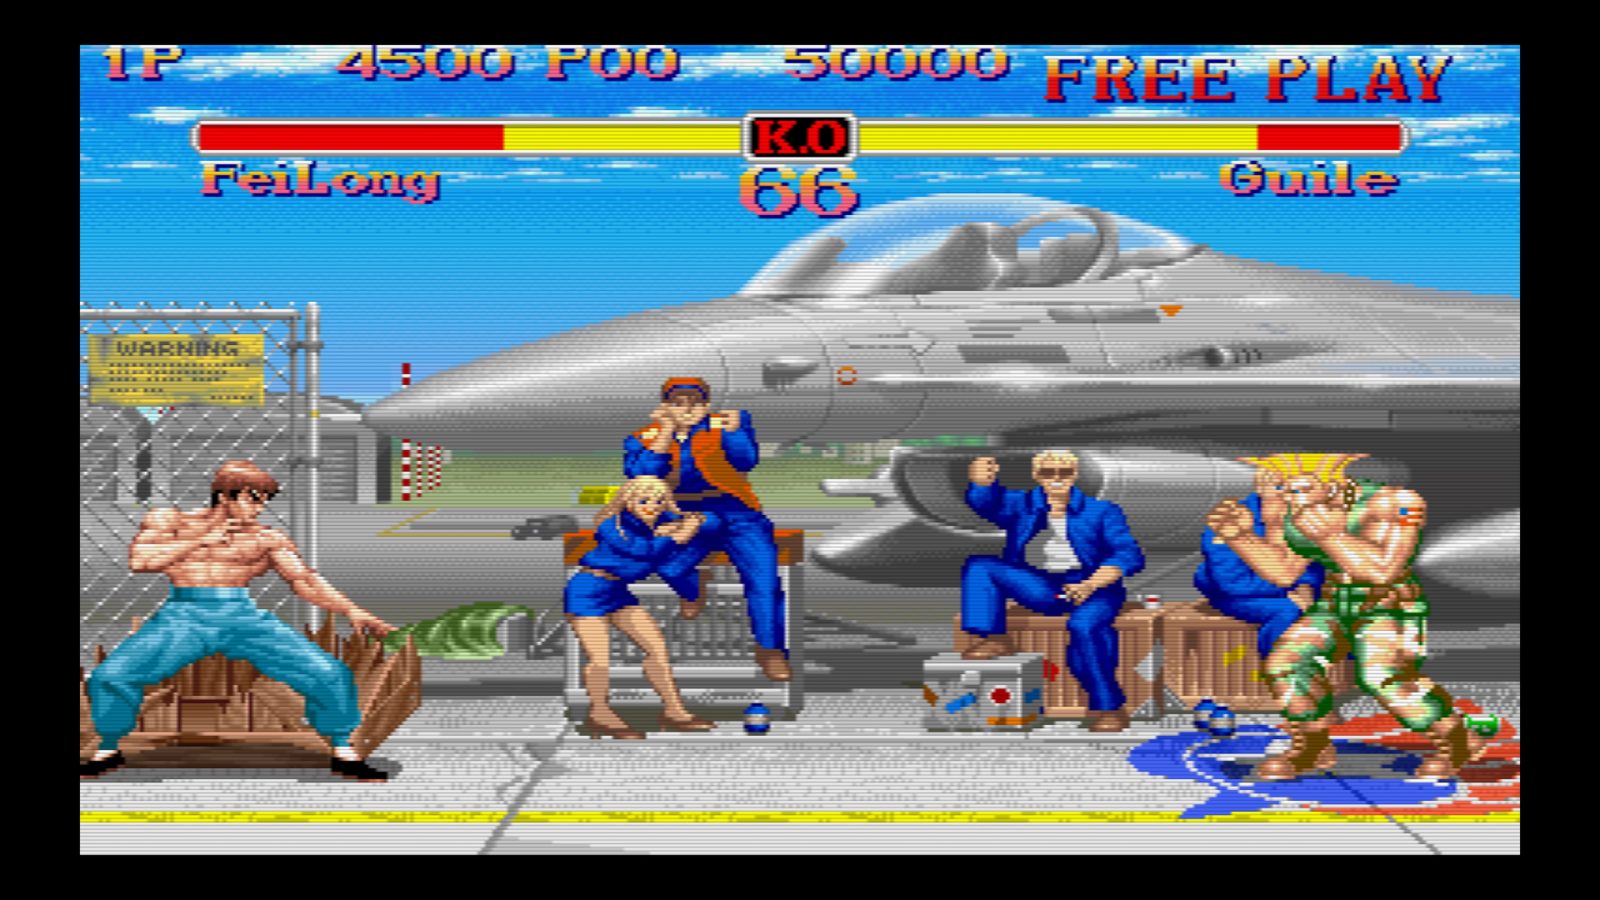 Review - STREET FIGHTER 30TH ANNIVERSARY COLLECTION - The Super